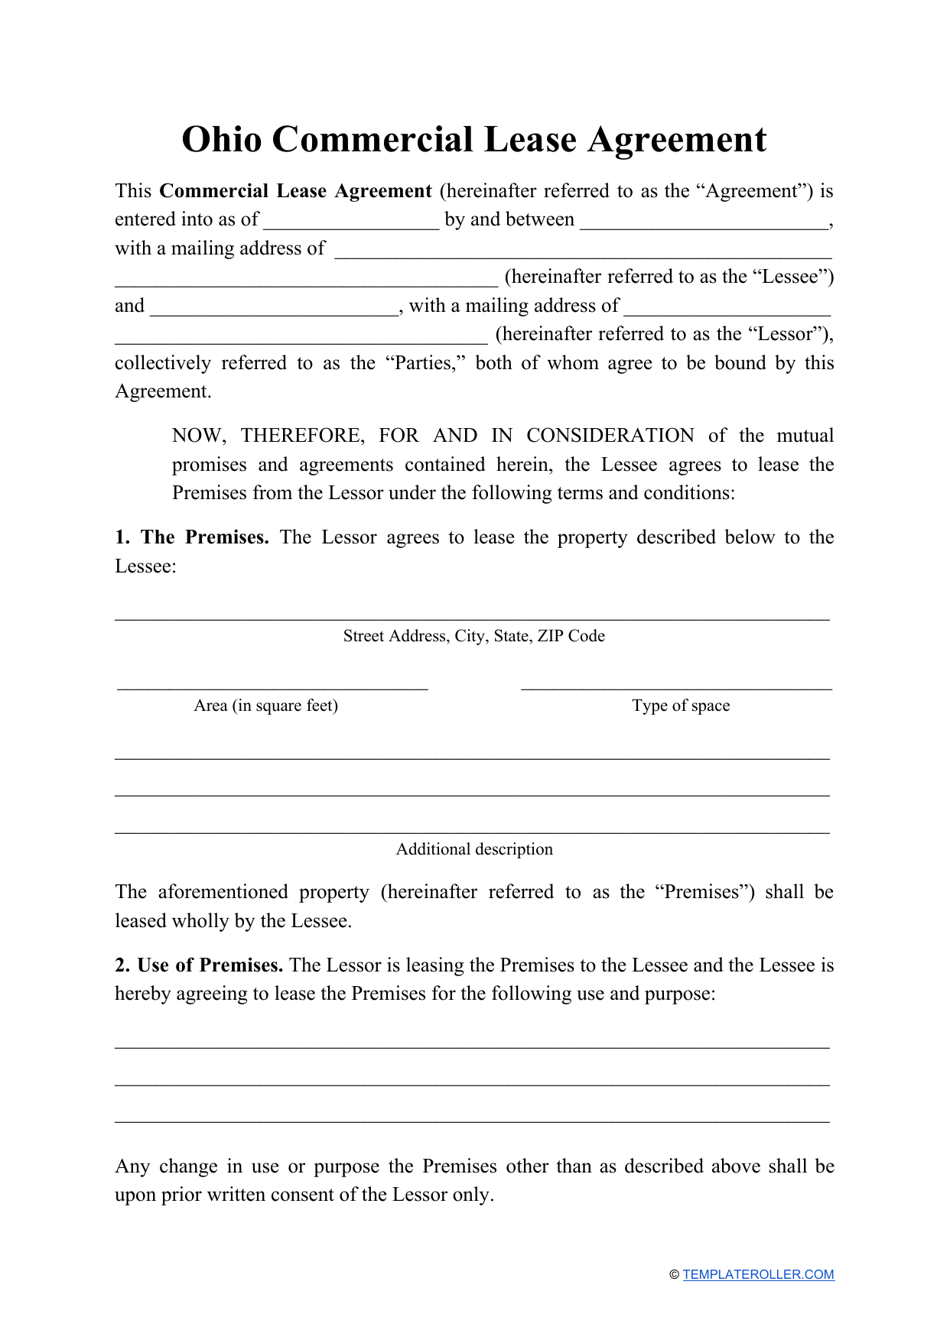 Commercial Lease Agreement Template - Ohio, Page 1